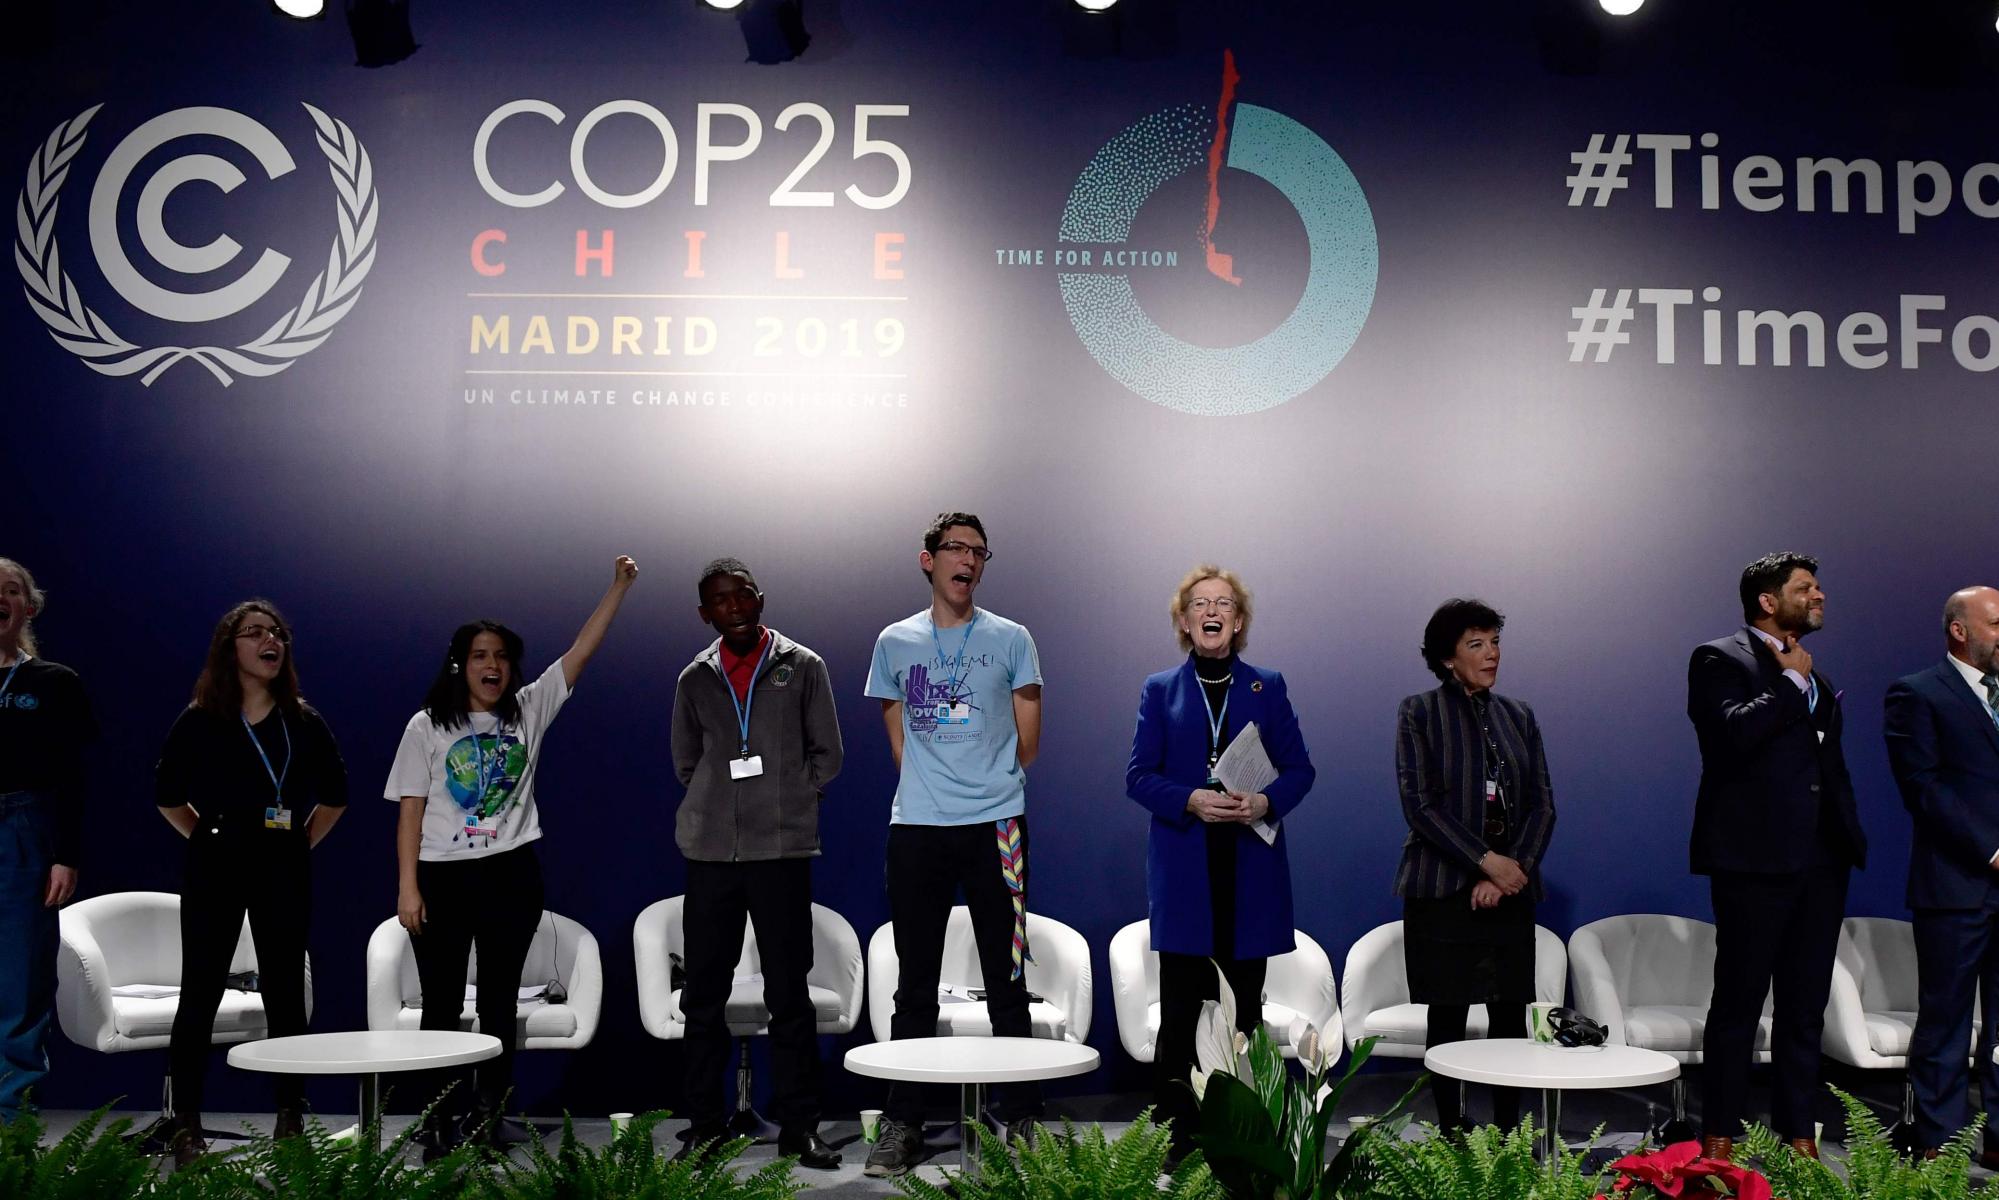 UK urged to tie green recovery from Covid-19 crisis  to Cop26 summit